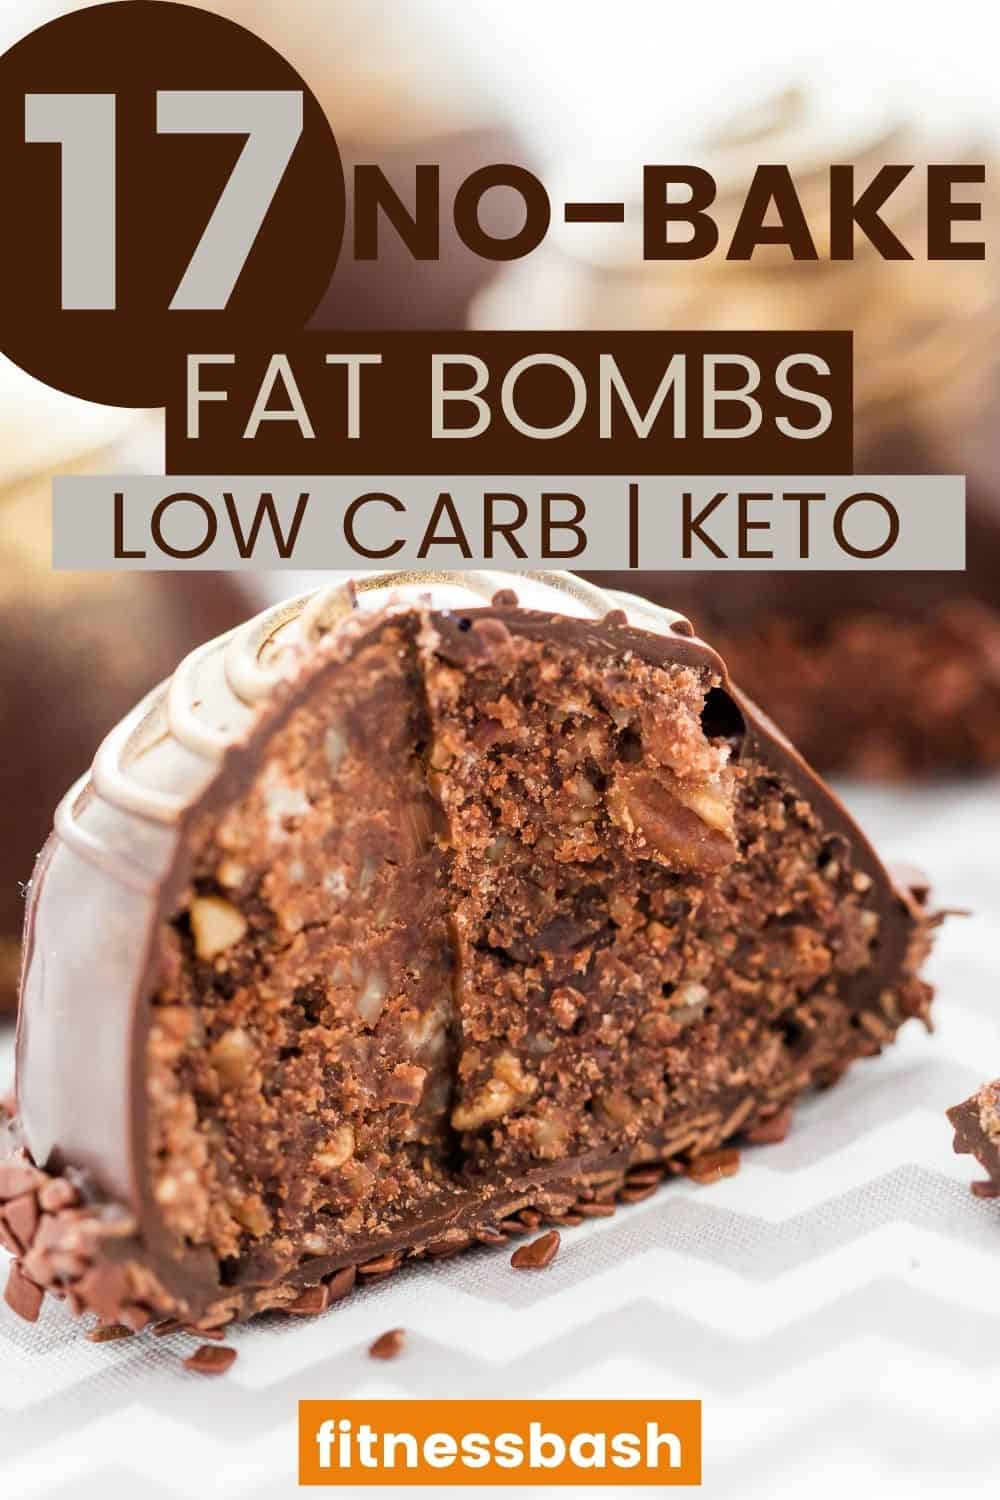 20 Best Easy Keto Fat Bombs To Lose Weight Effectively   Fitness Bash